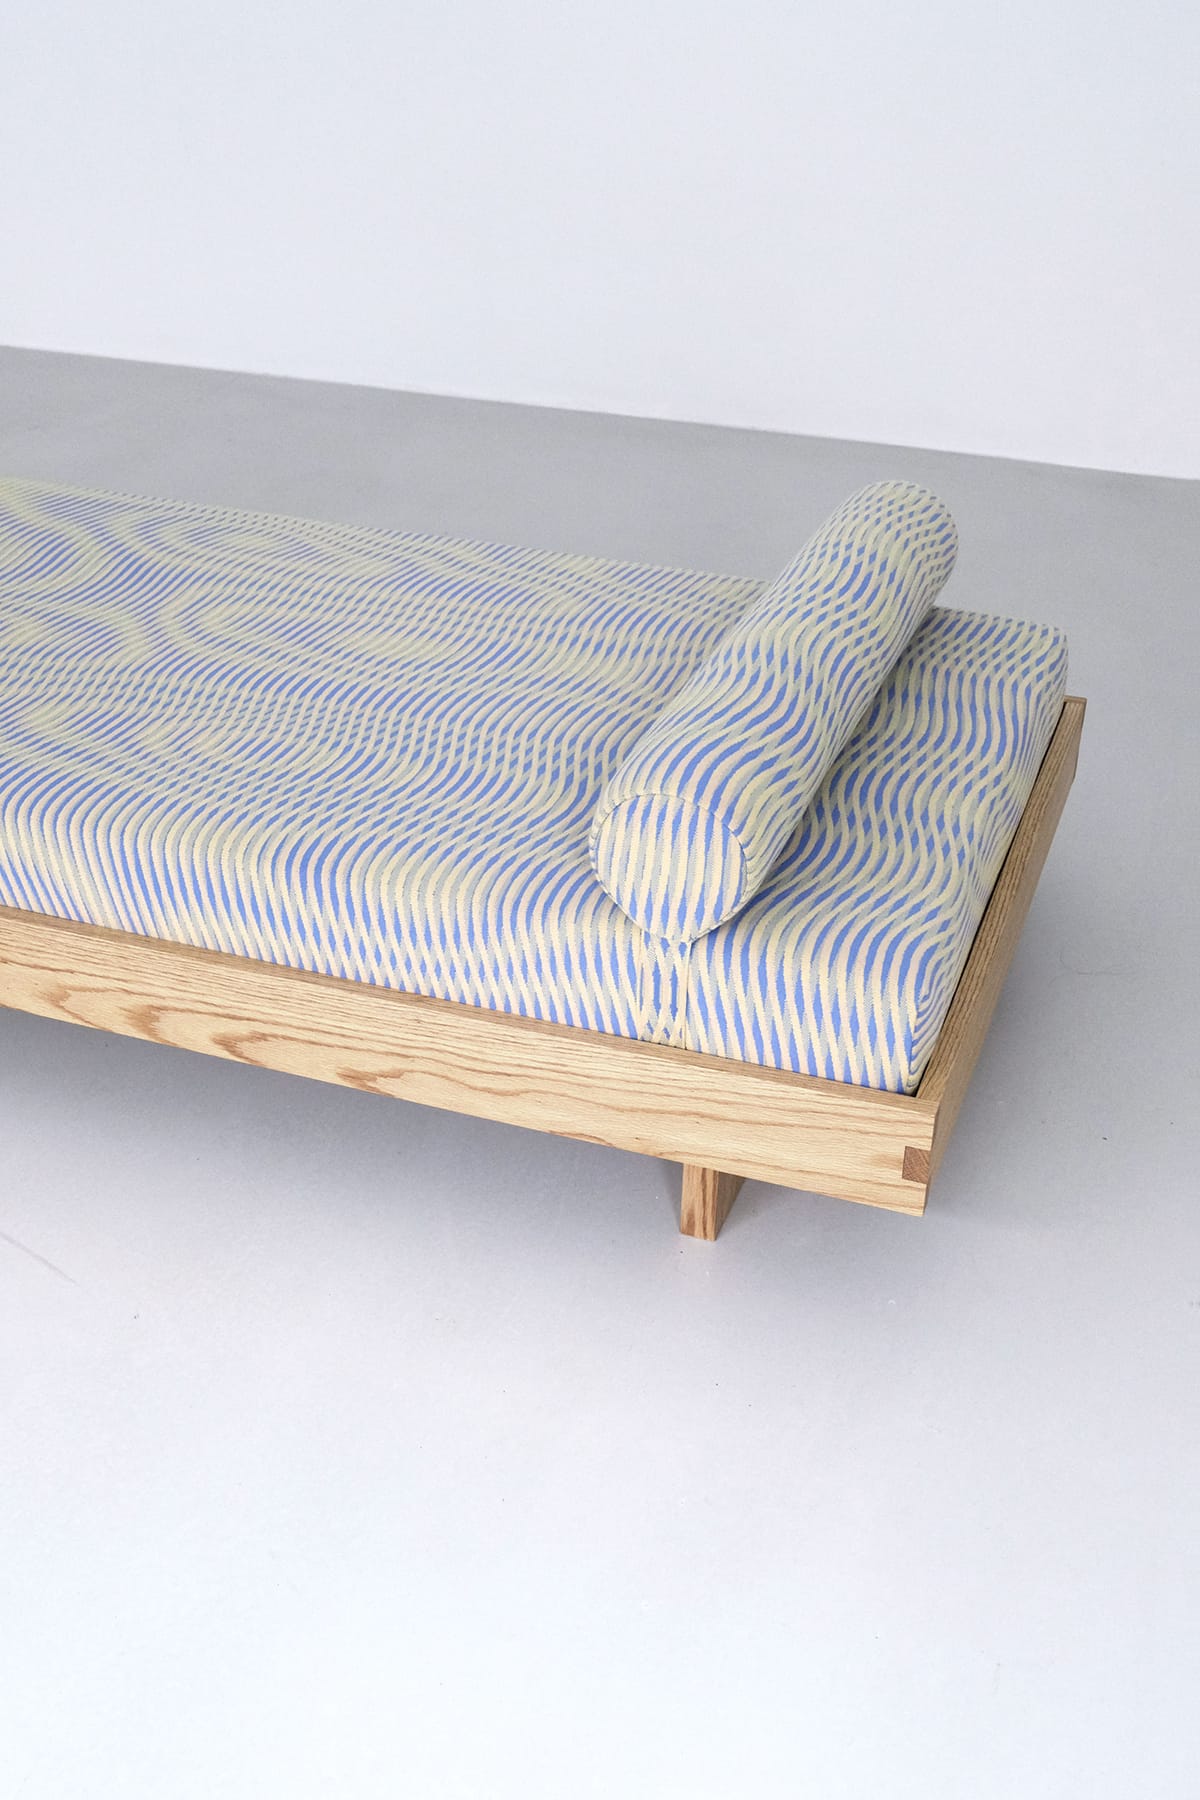 Upholstery-Knit-Daybed